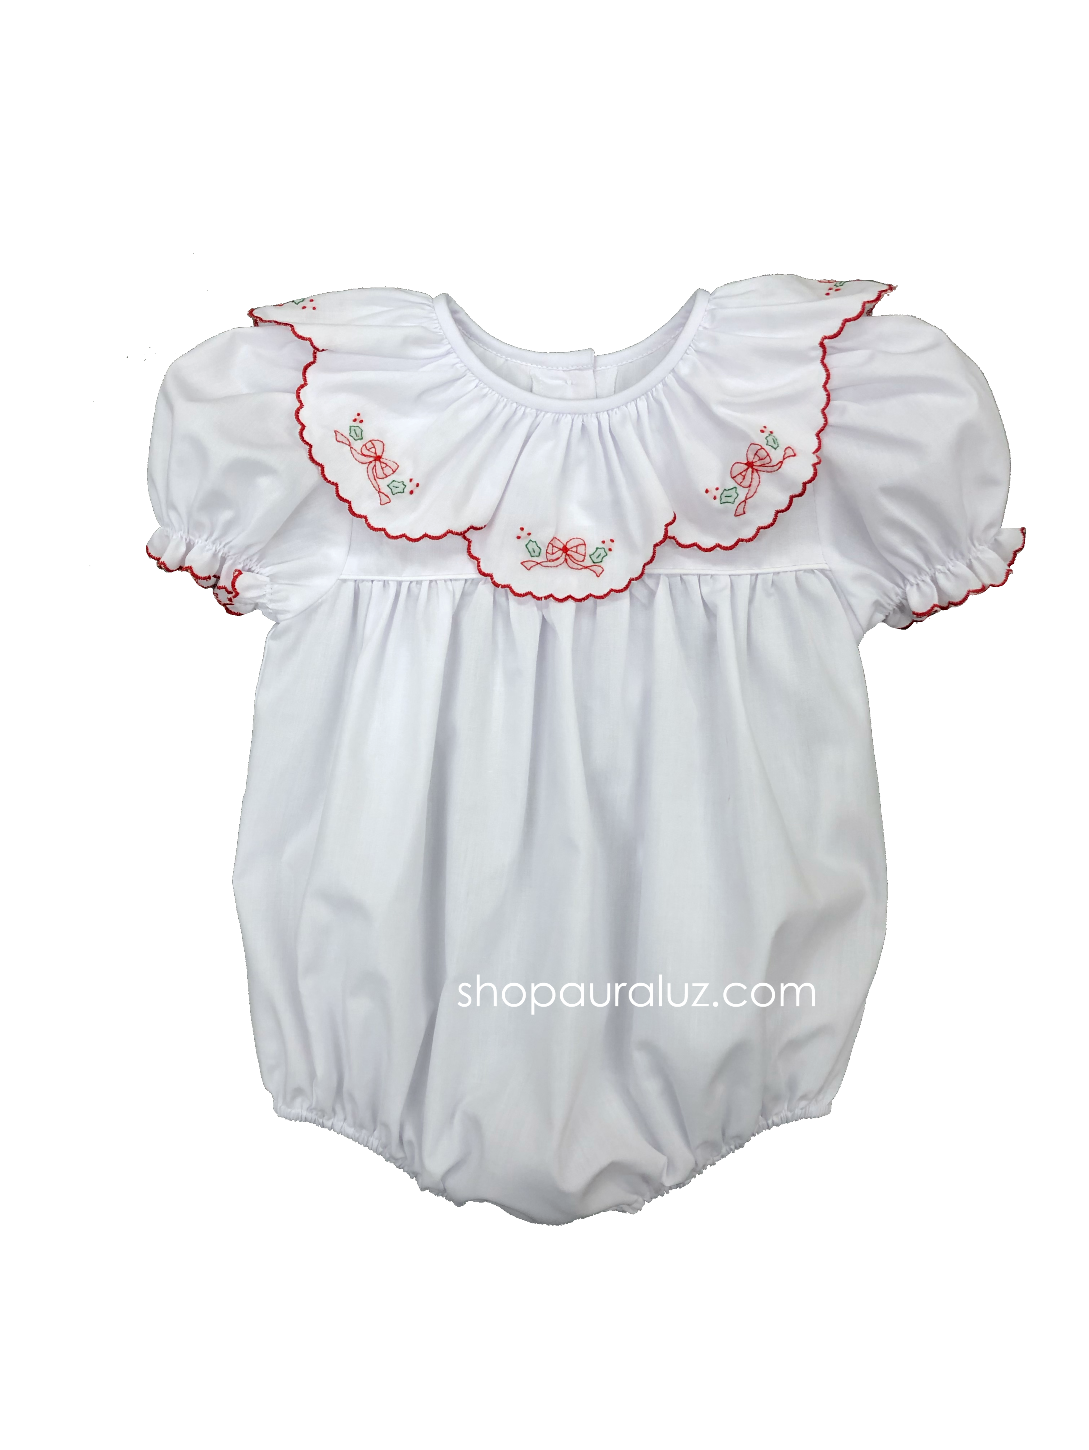 Auraluz Christmas Bubble...White with ruffle collar and embroidered bows